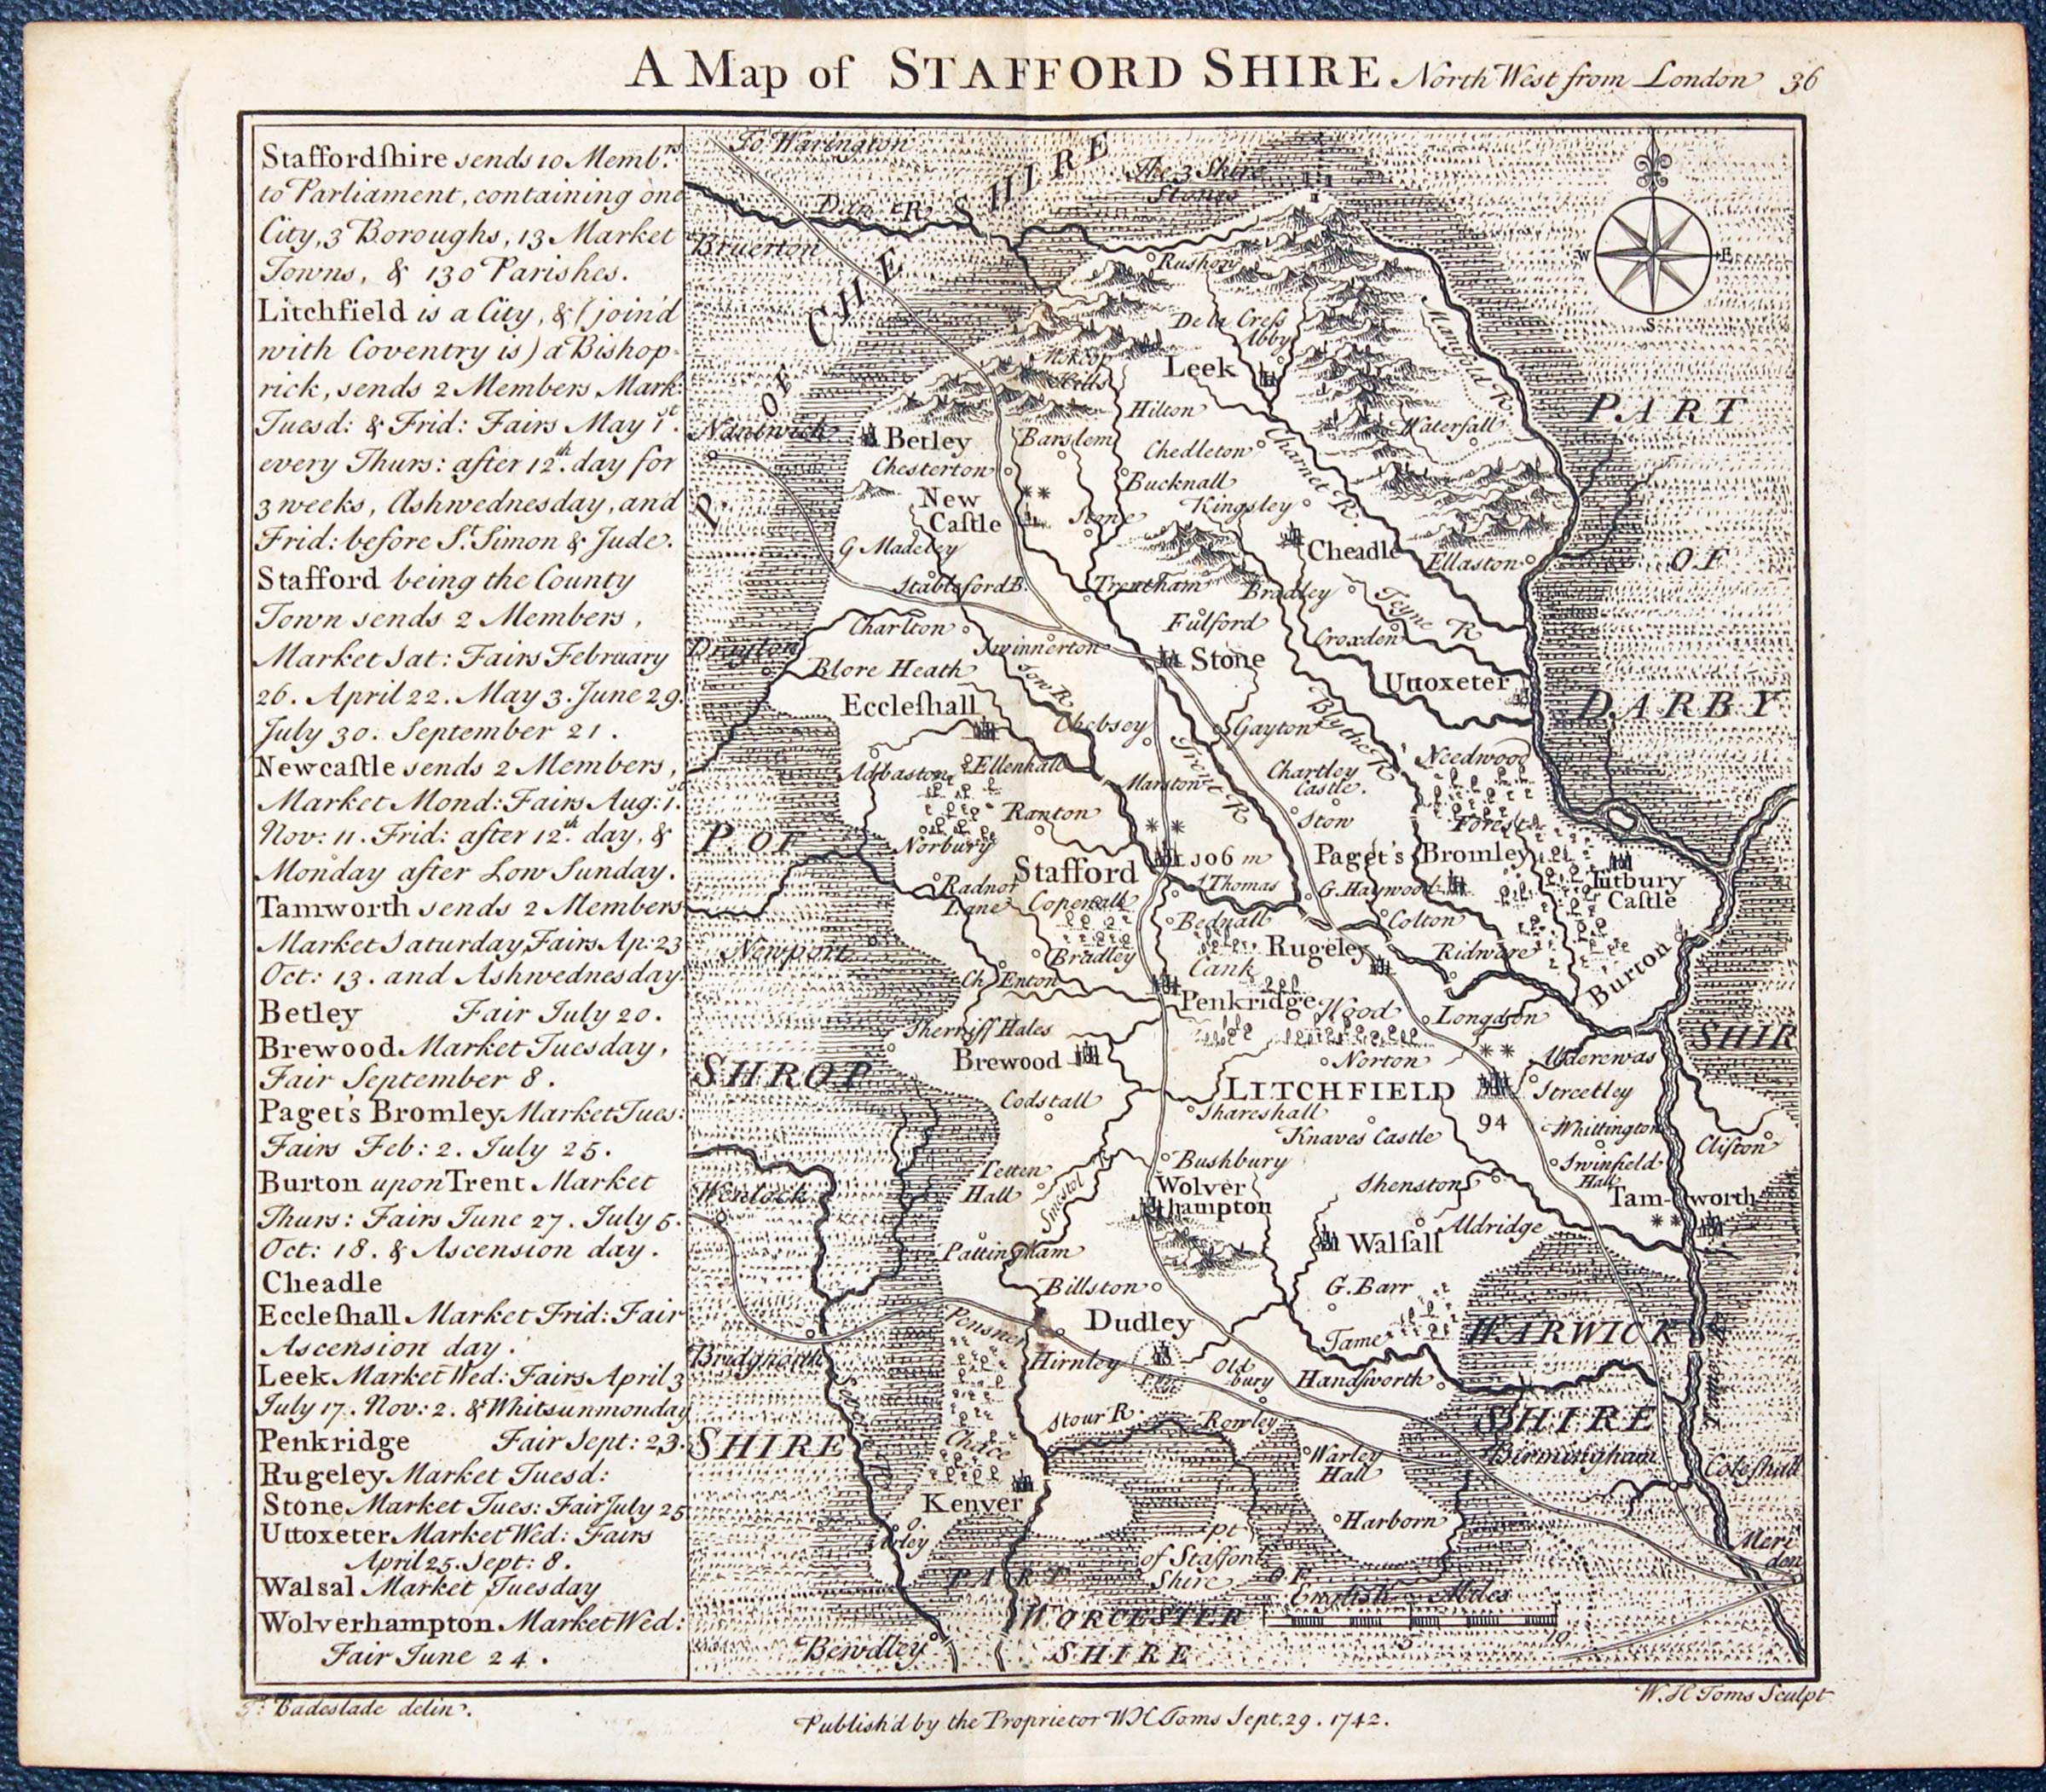  Map of Staffordshire by W. H. Toms and T.Badeslade 1742 